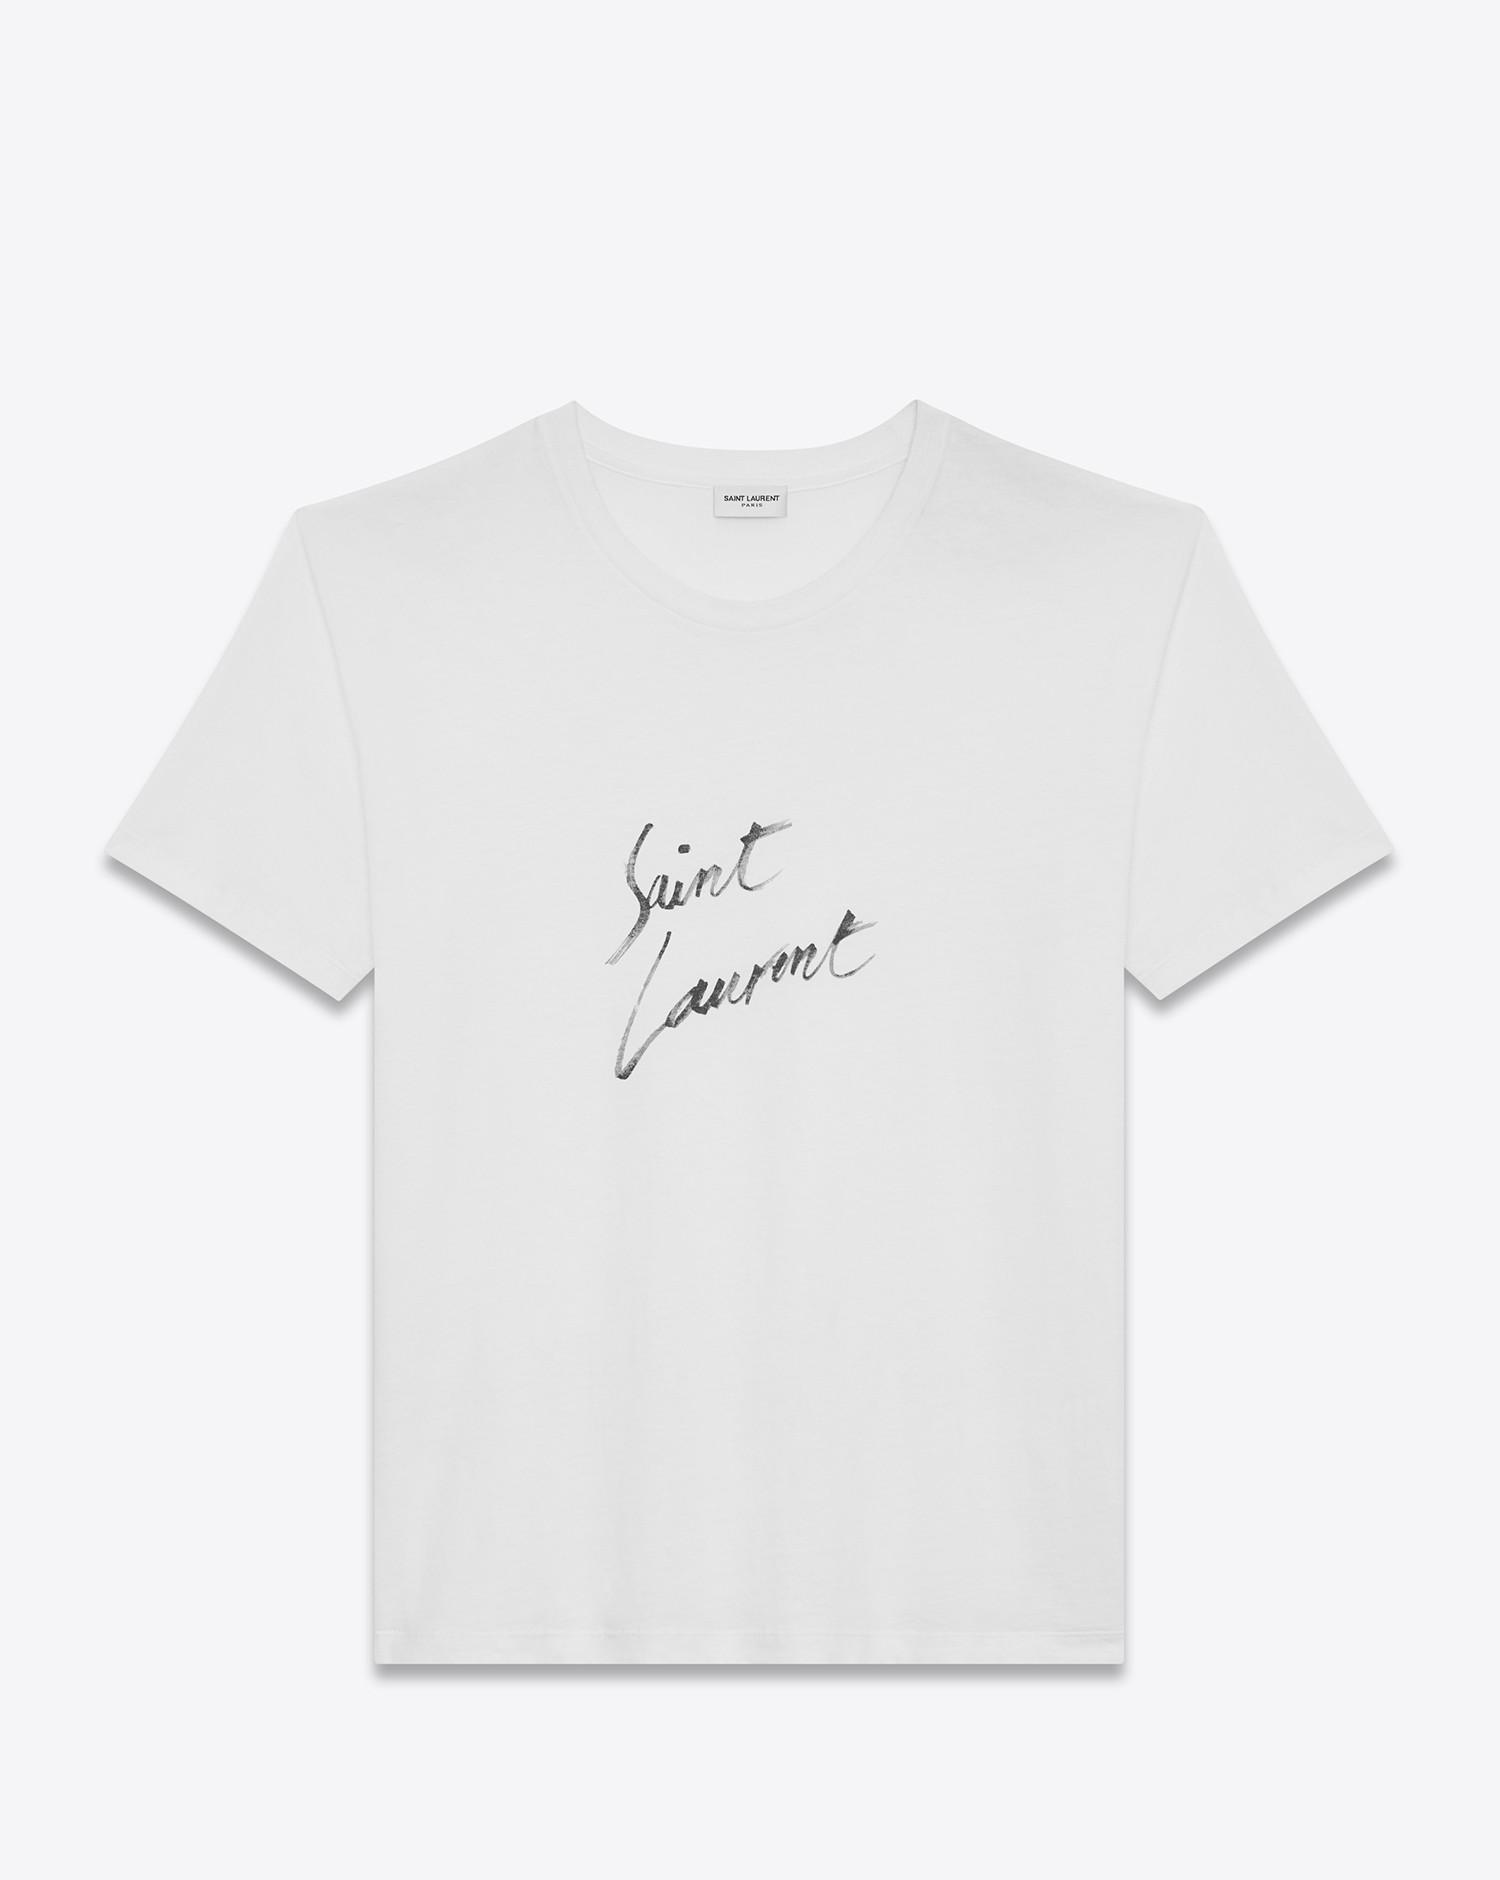 Saint Laurent Signature T-shirt In Ivory And Black Cotton Jersey 